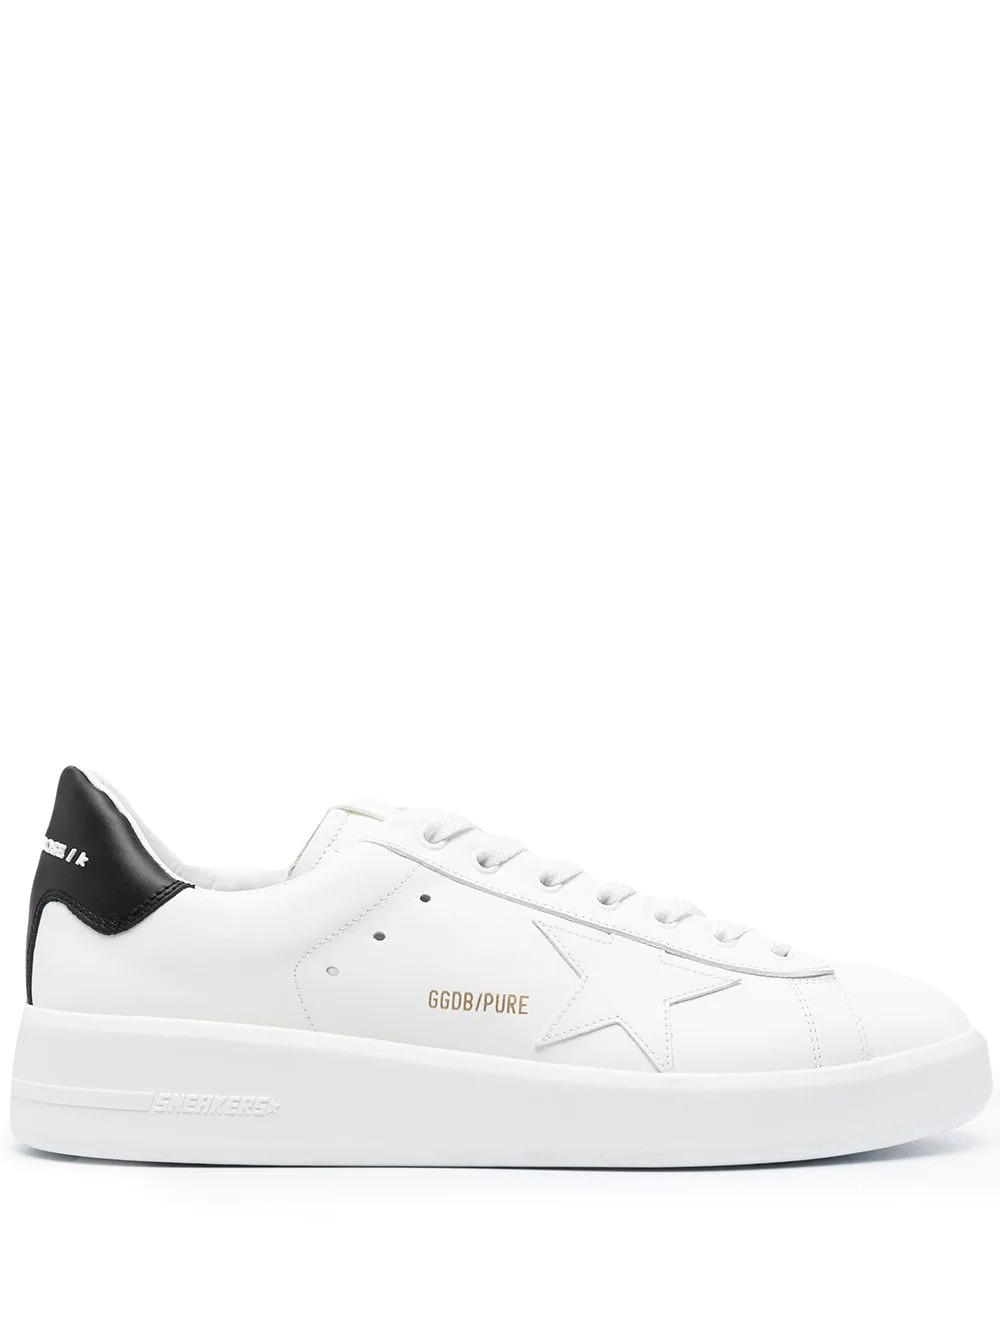 Buy Sneakers Golden Goose Pure lace-up sneakers (GMF00197 | F000537 ...